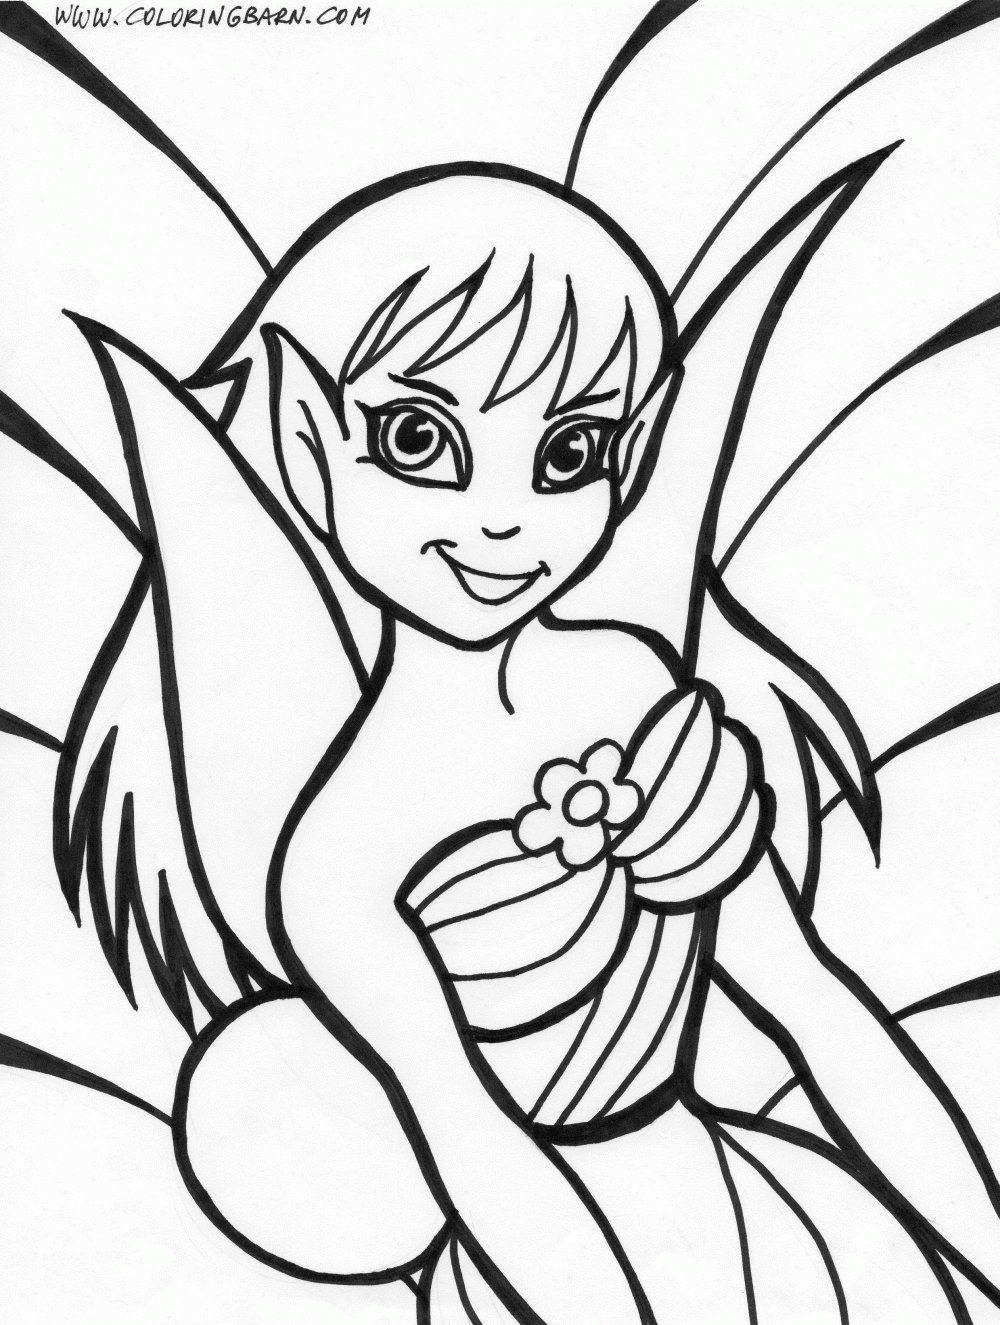 Disney Fairies Coloring Pages Colouring - Coloring Kids